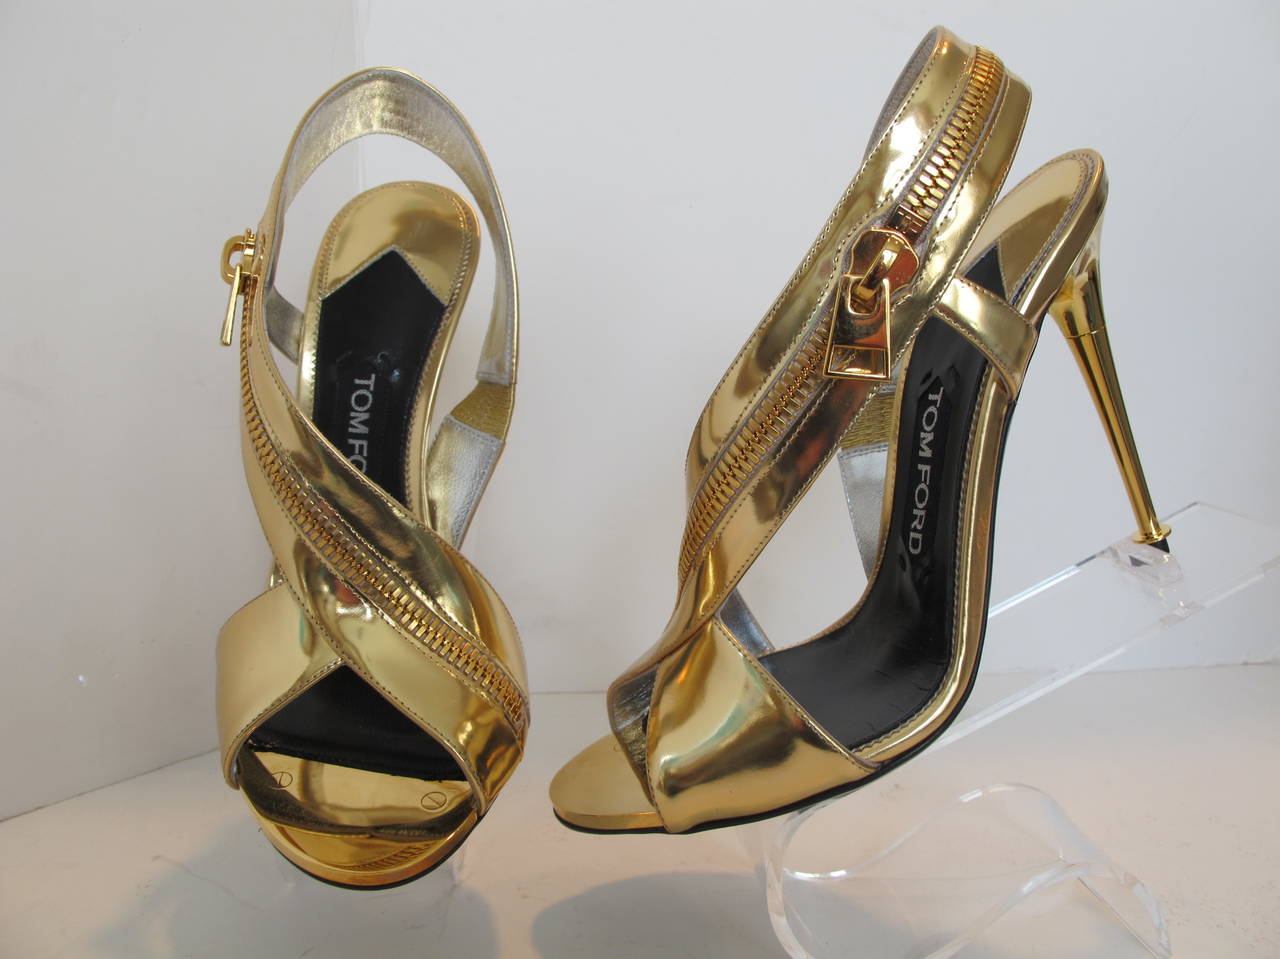 2014 Tom Ford Gold Sling Back Sandal with Wrap Around Zipper In New Condition For Sale In San Francisco, CA